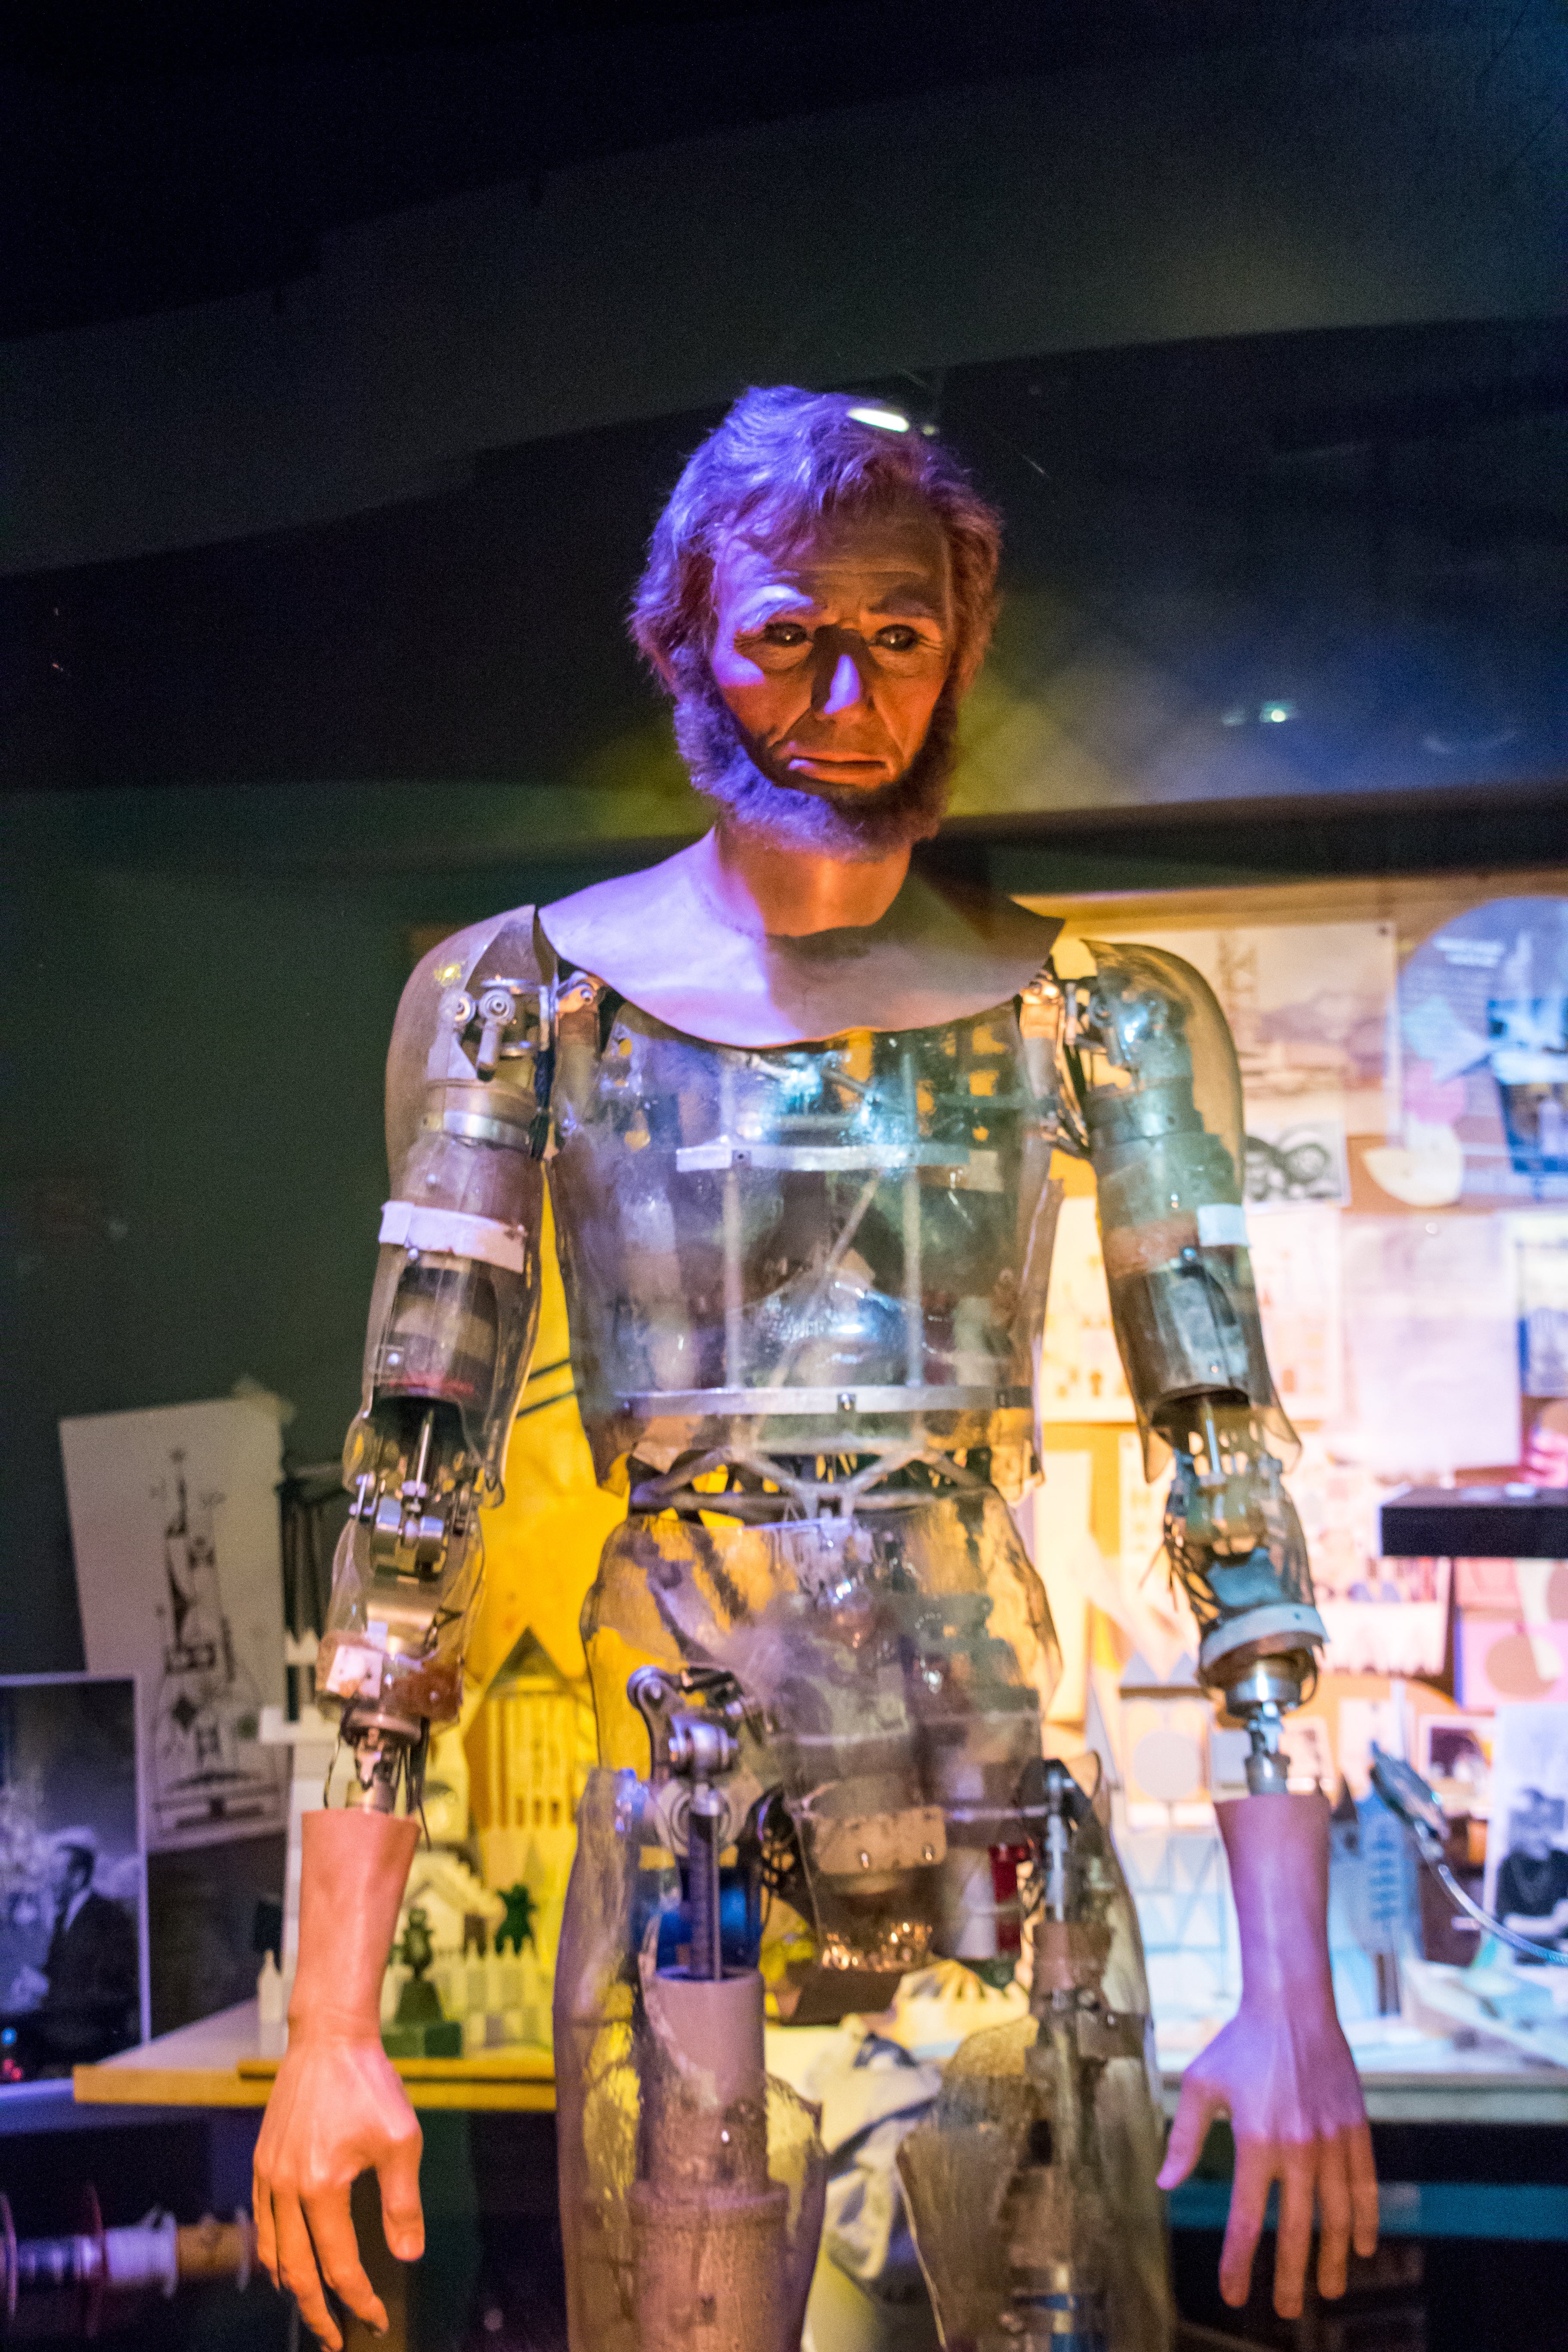 The Mr. Lincoln robot from Great Moments With Mr. Lincoln, undressed, showing transparent skin and lots of internal mechanics.